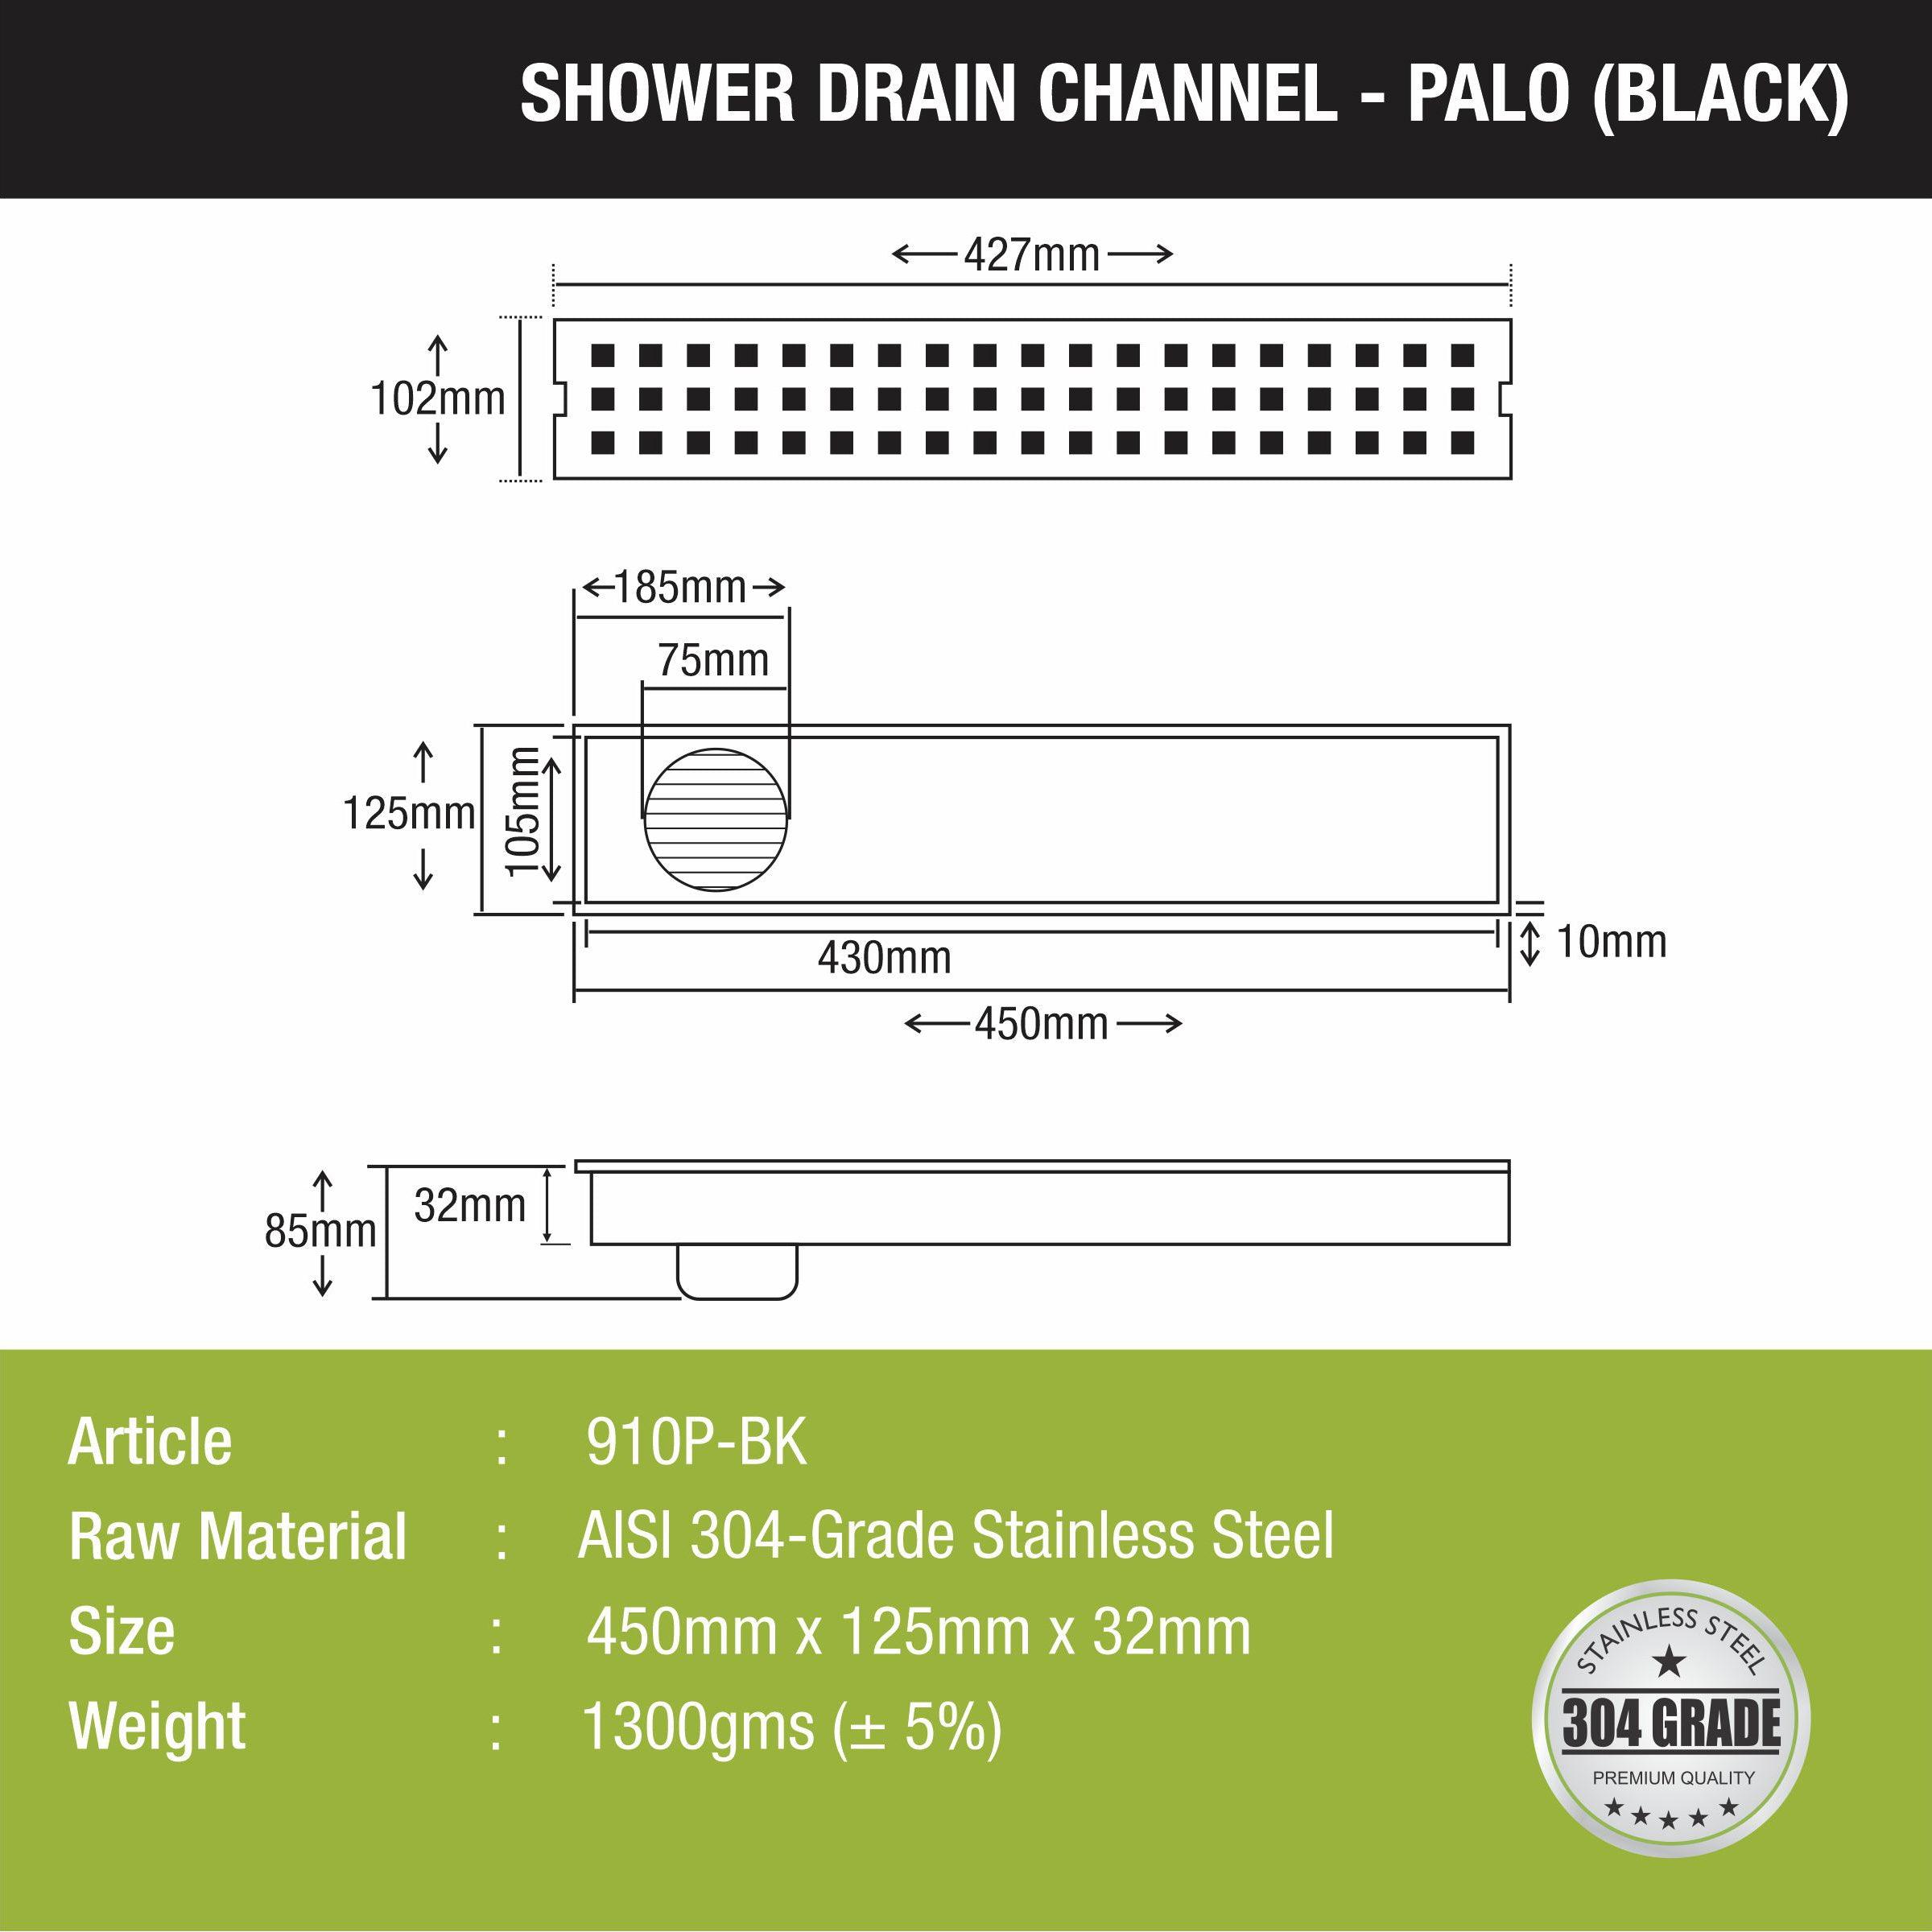 Palo Shower Drain Channel - Black (18 x 5 Inches) size and measurement